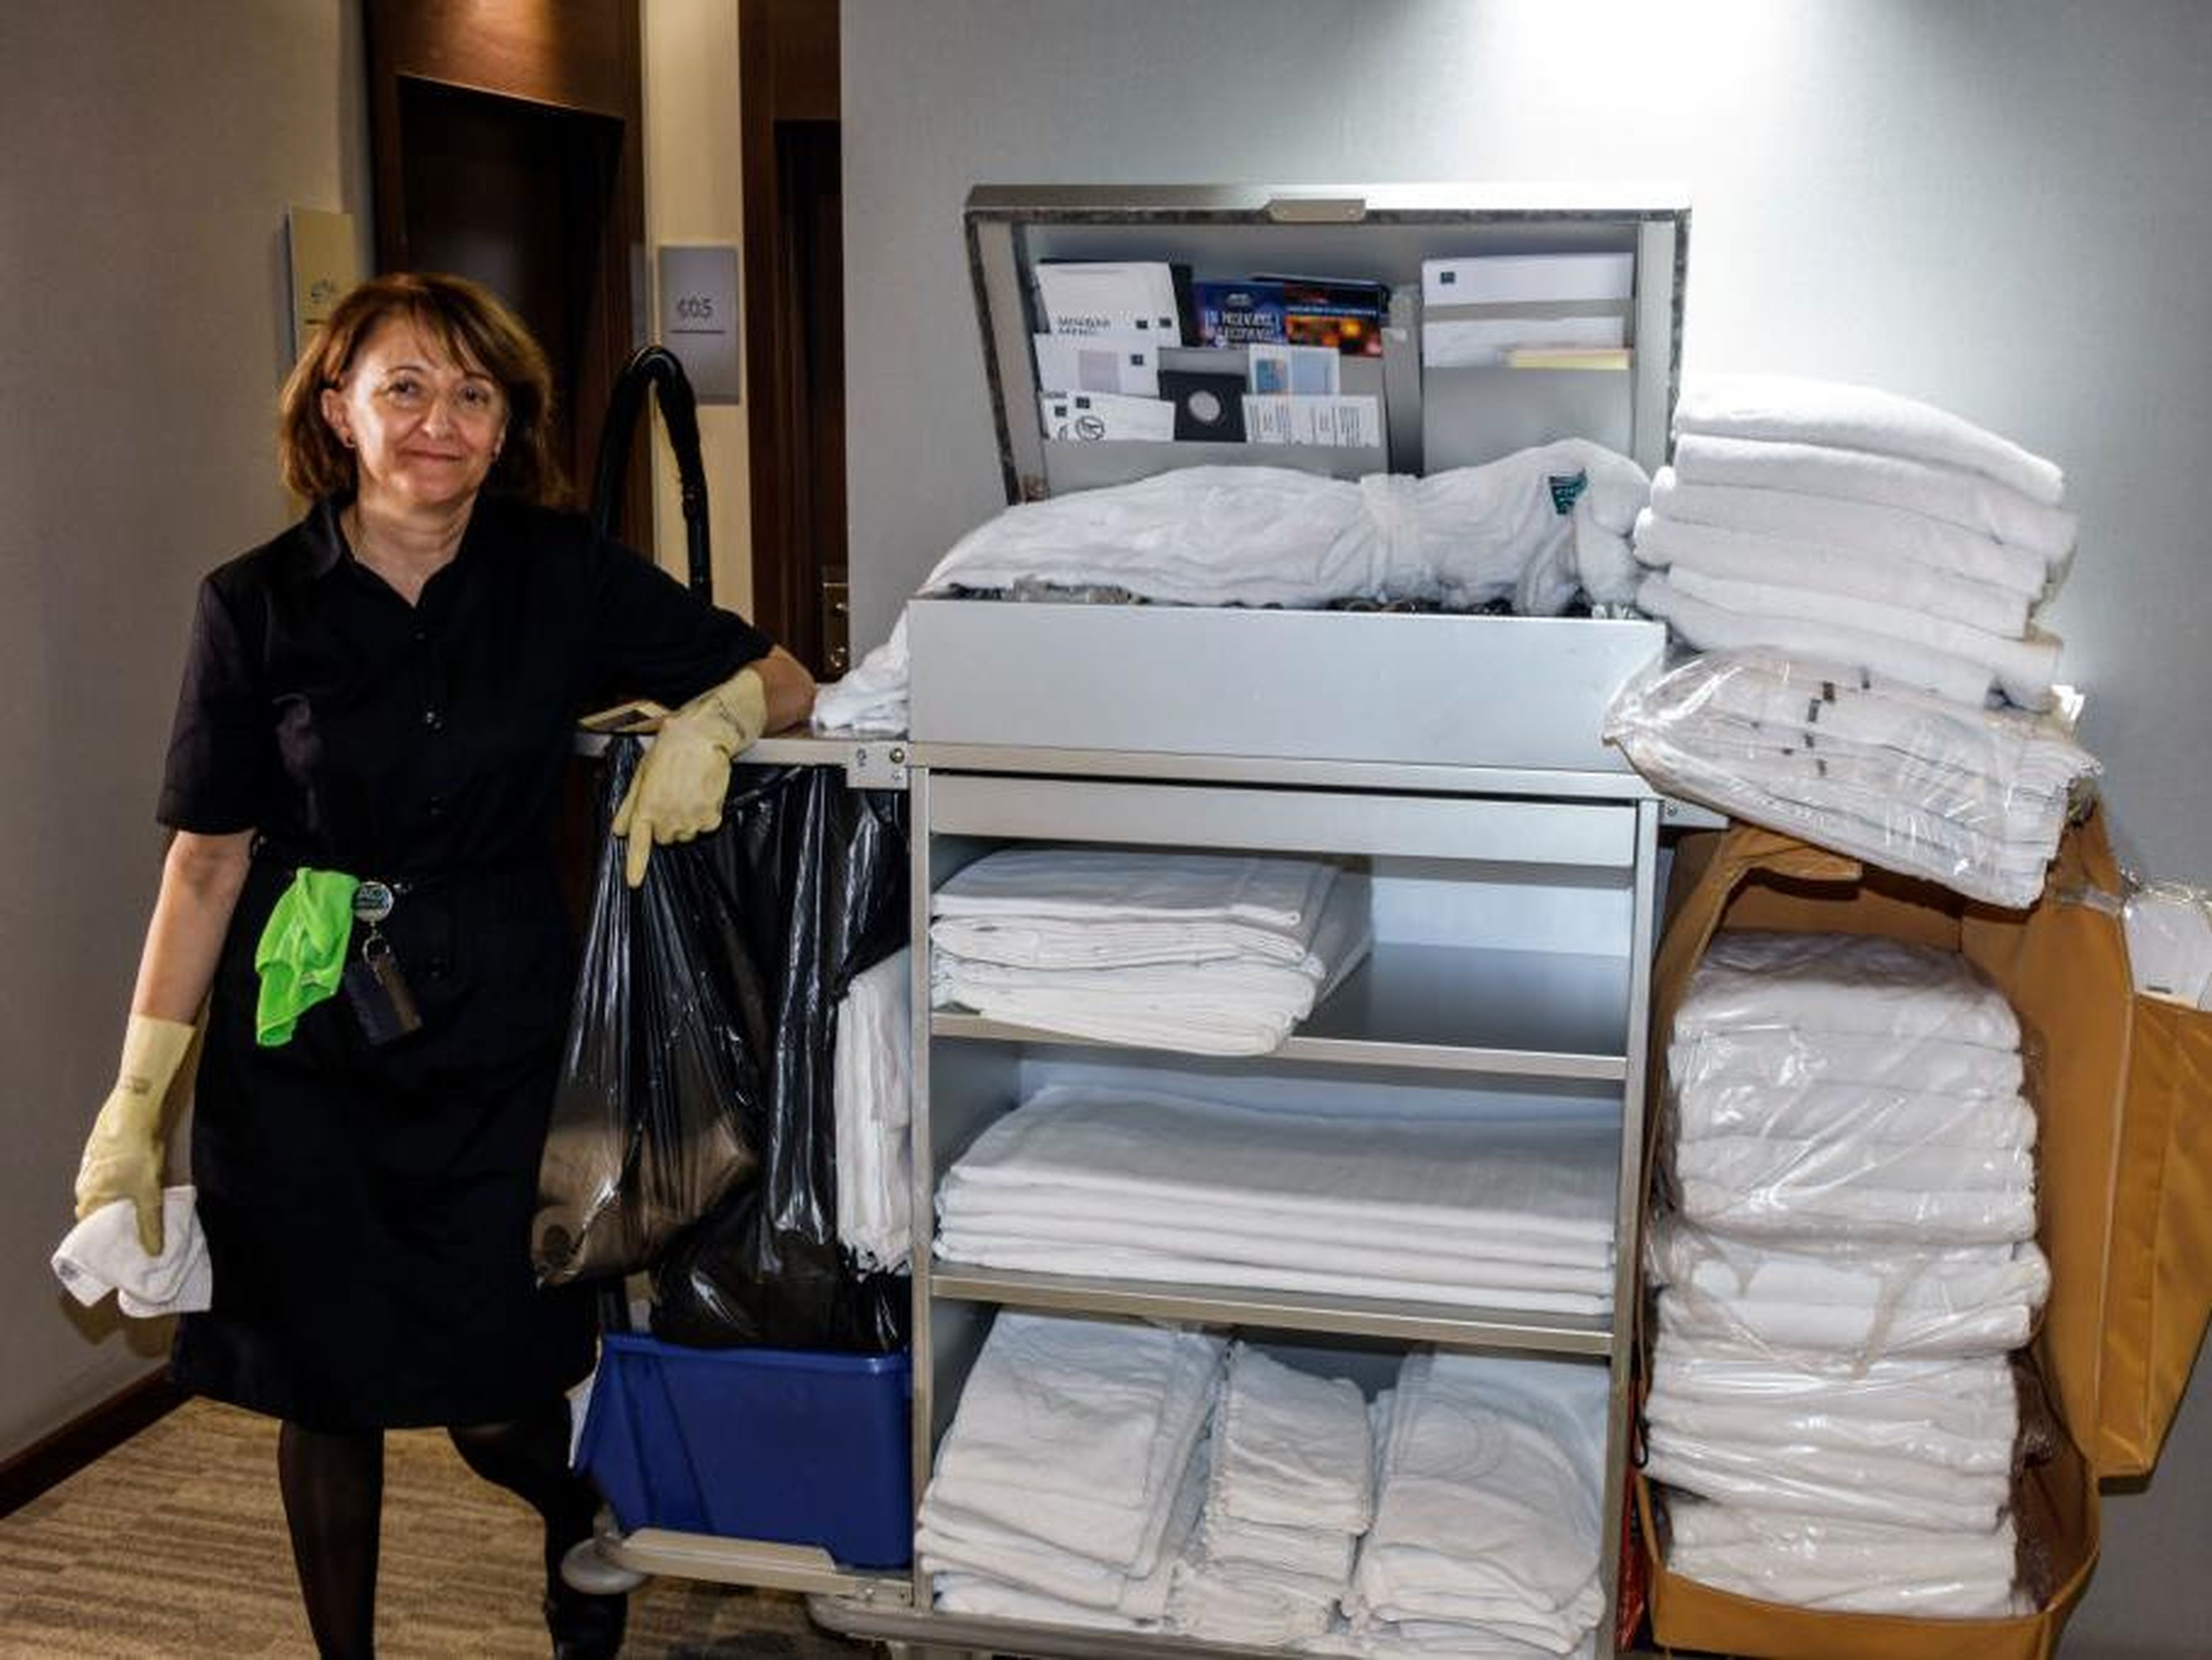 Most importantly, treat housekeepers like human beings